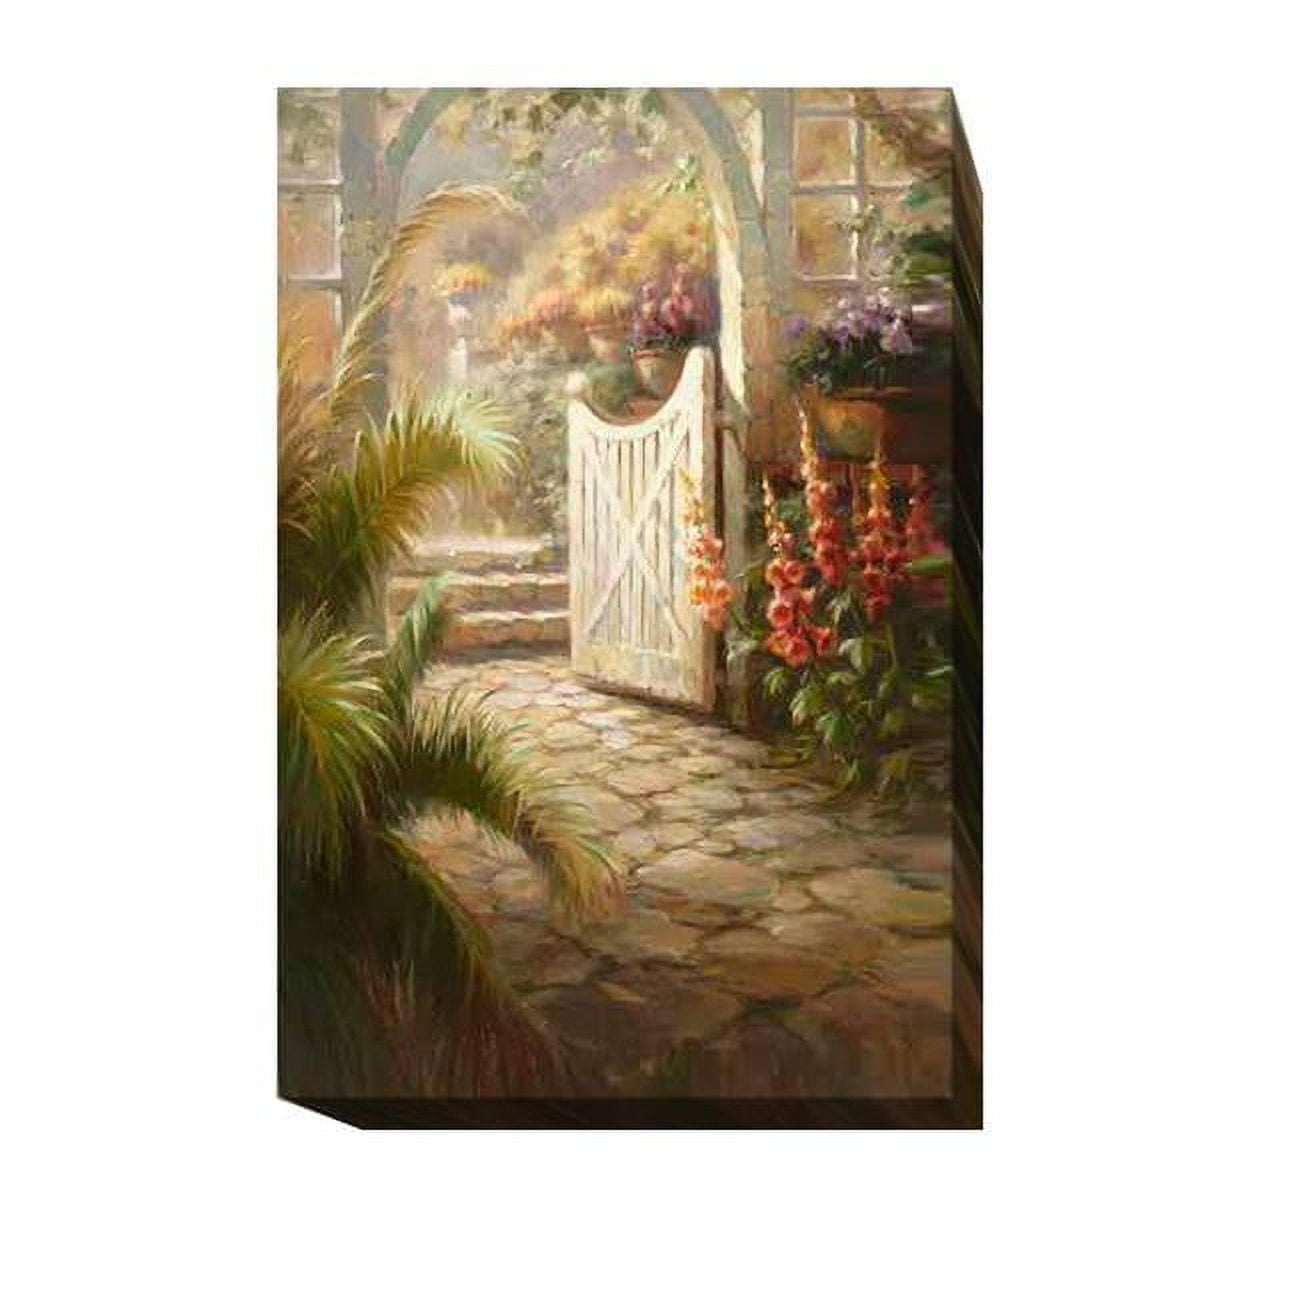 1218g533eg Morning In The Garden By Roberto Lombardi Premium Gallery-wrapped Canvas Giclee Art - 12 X 18 X 1.5 In.